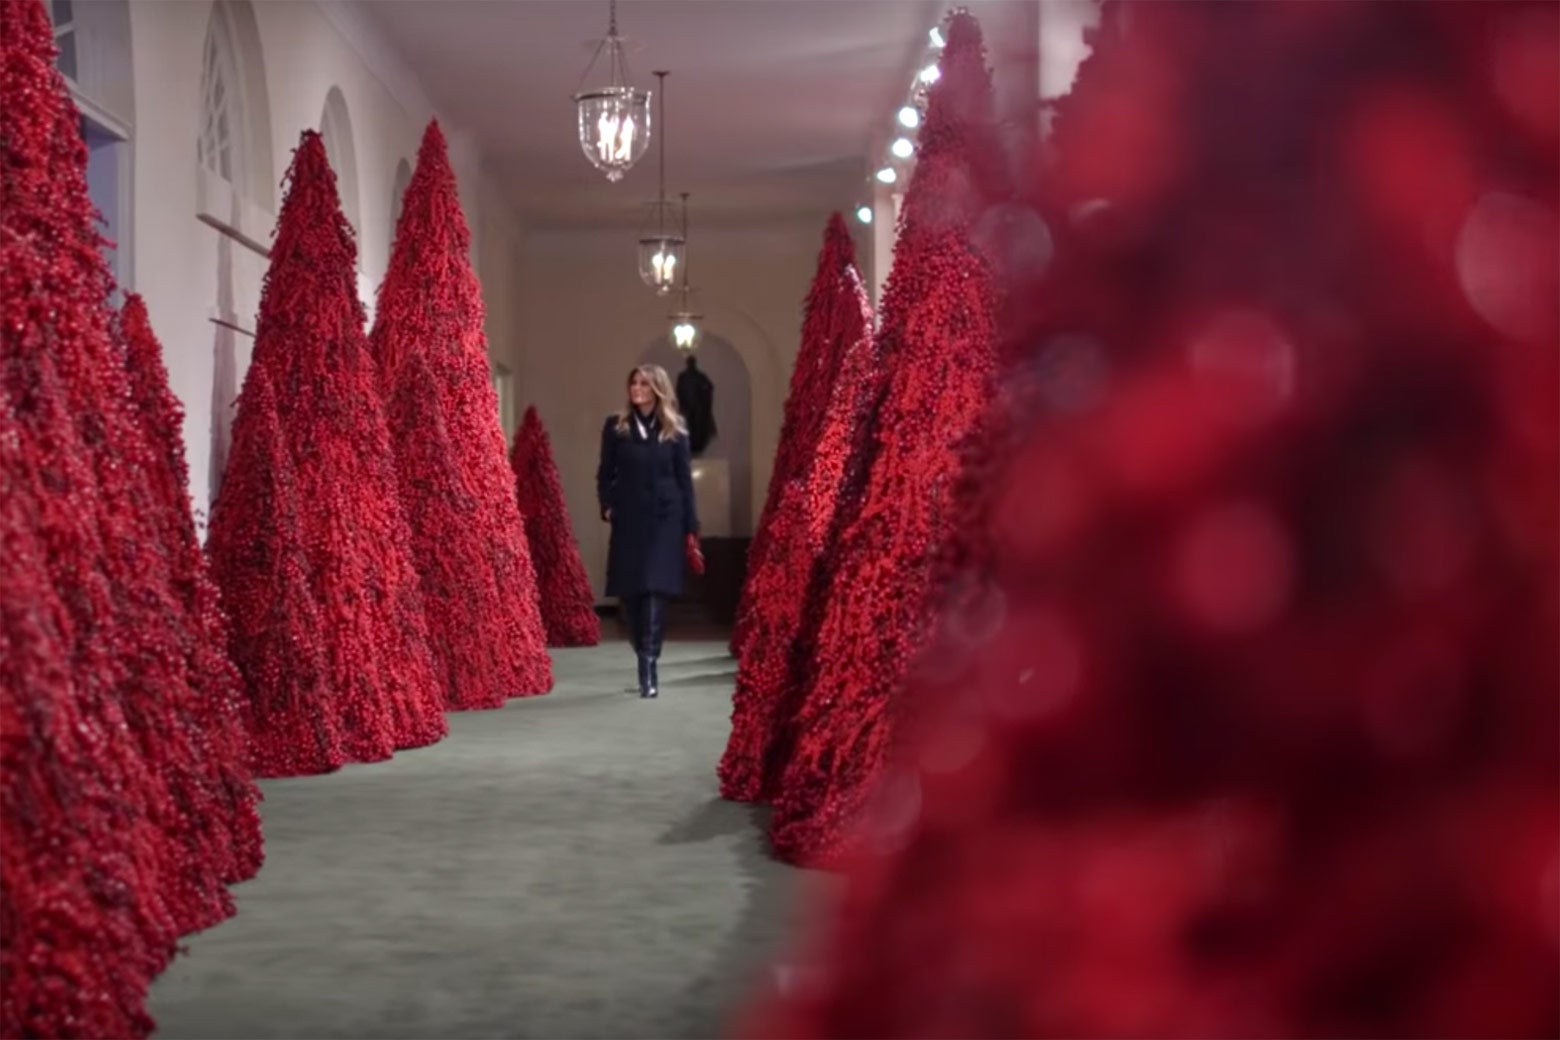 Melania Trump walks down a hallway lined with giant red textured cones.